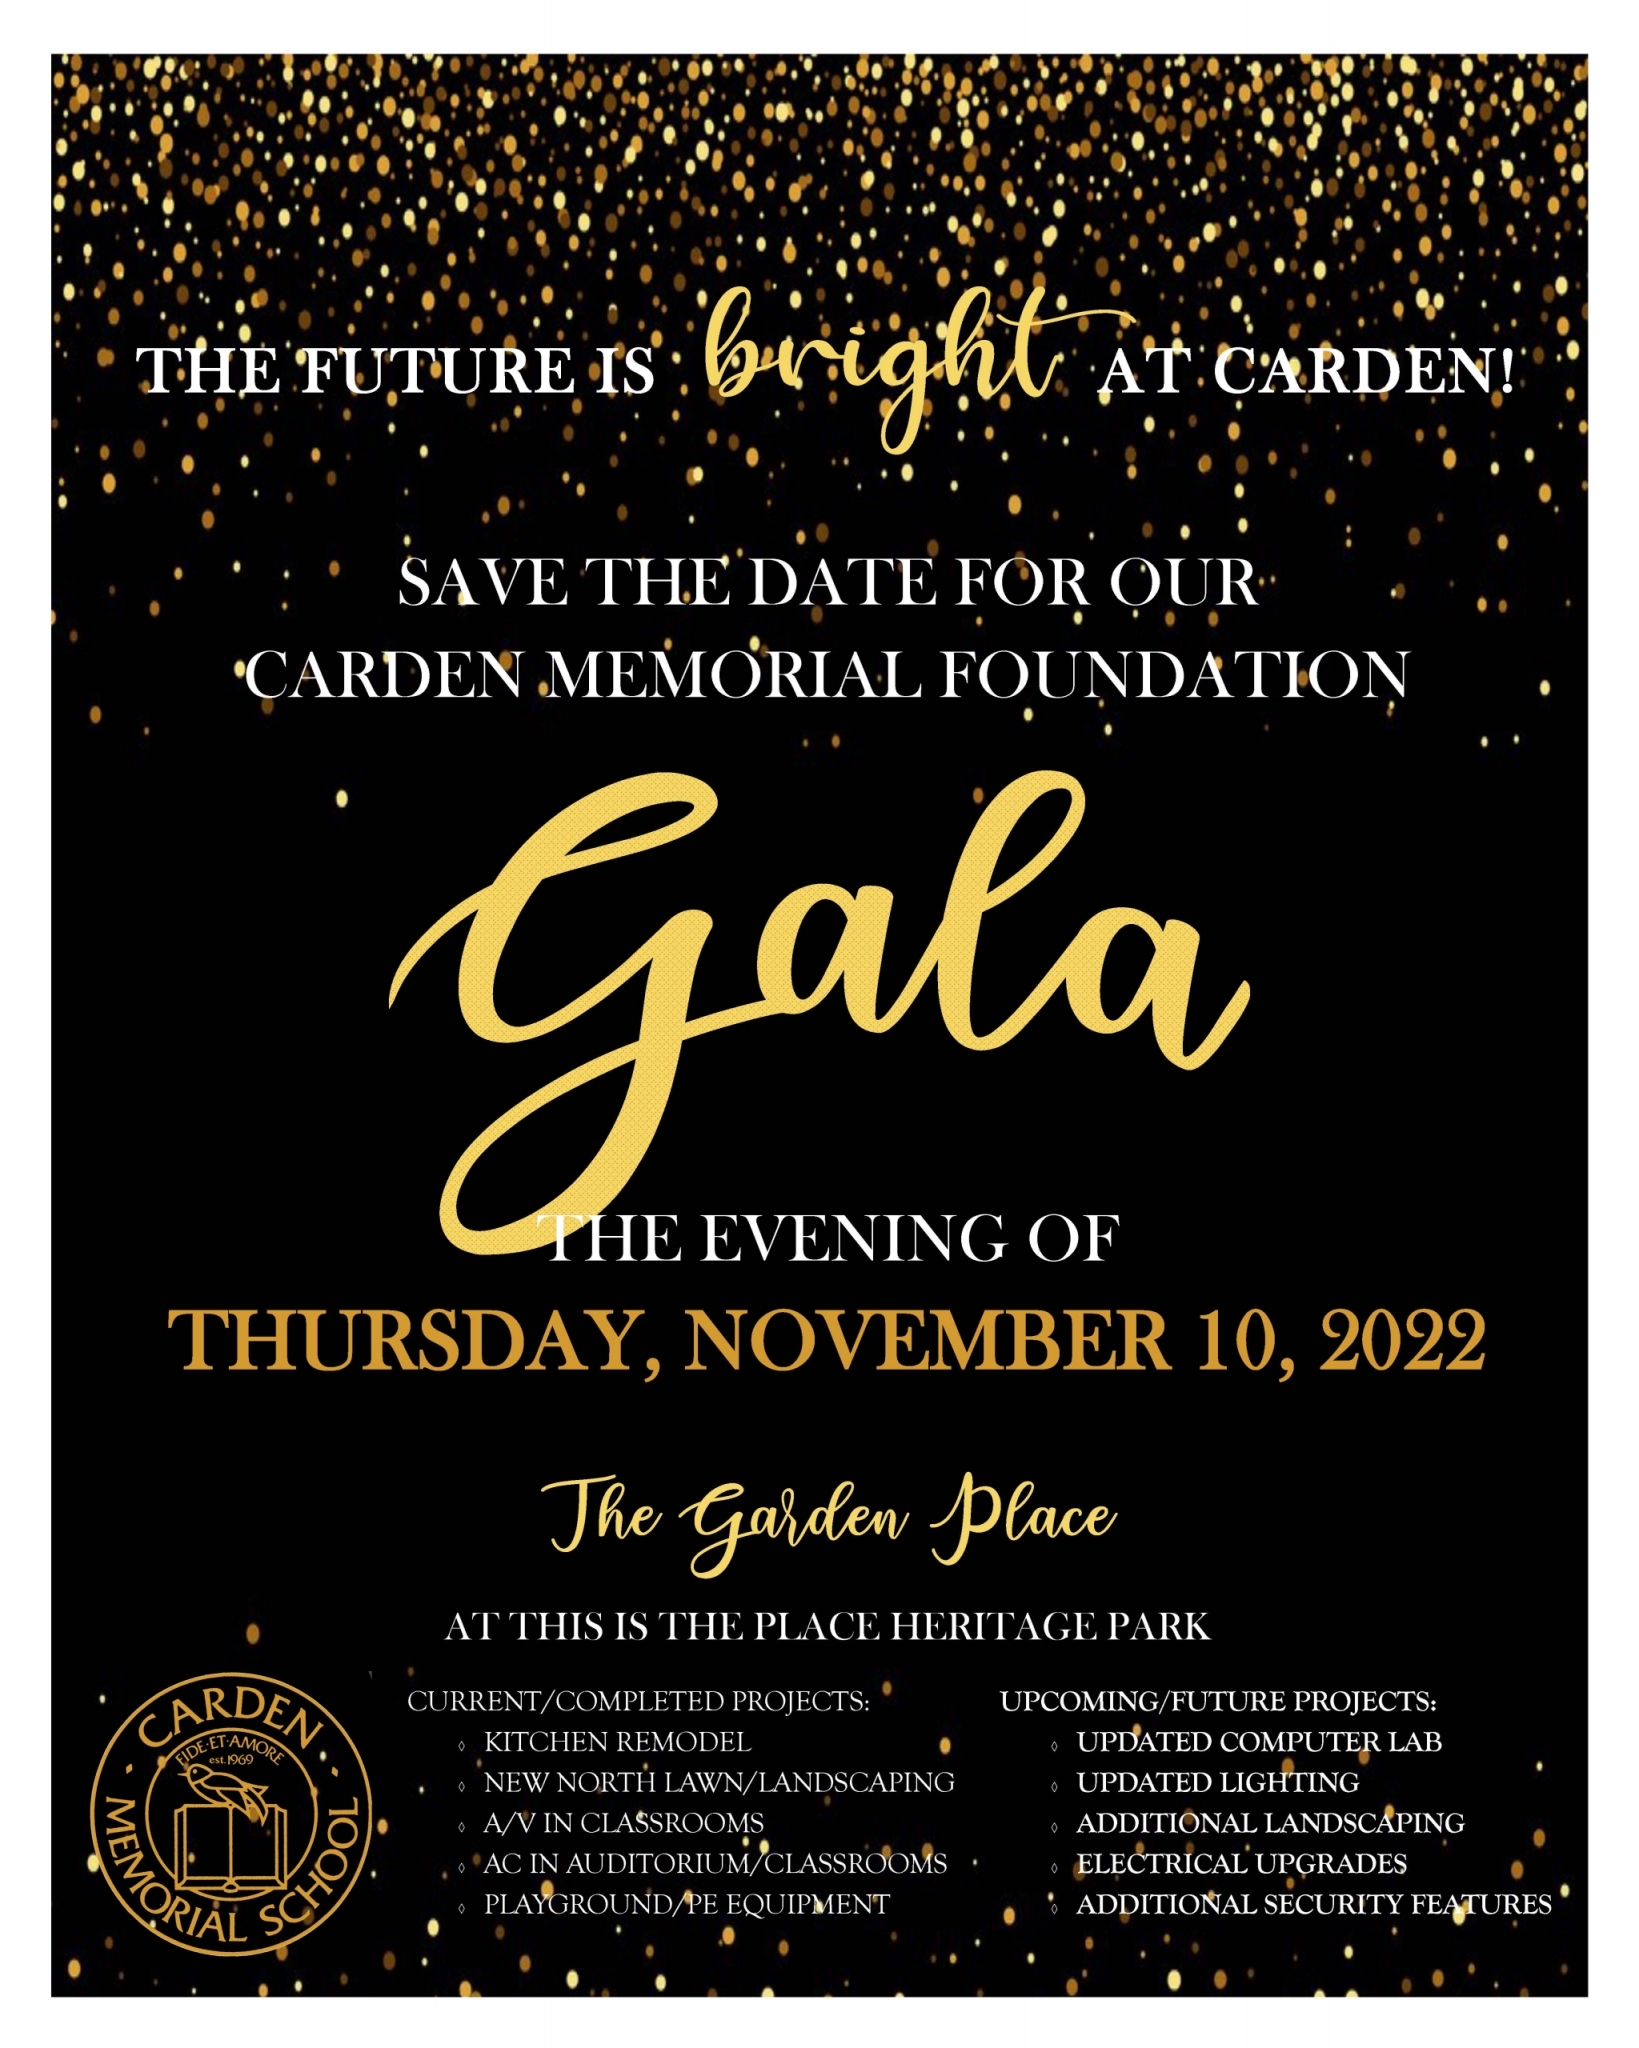 Carden Gala Save the Date Poster 2022